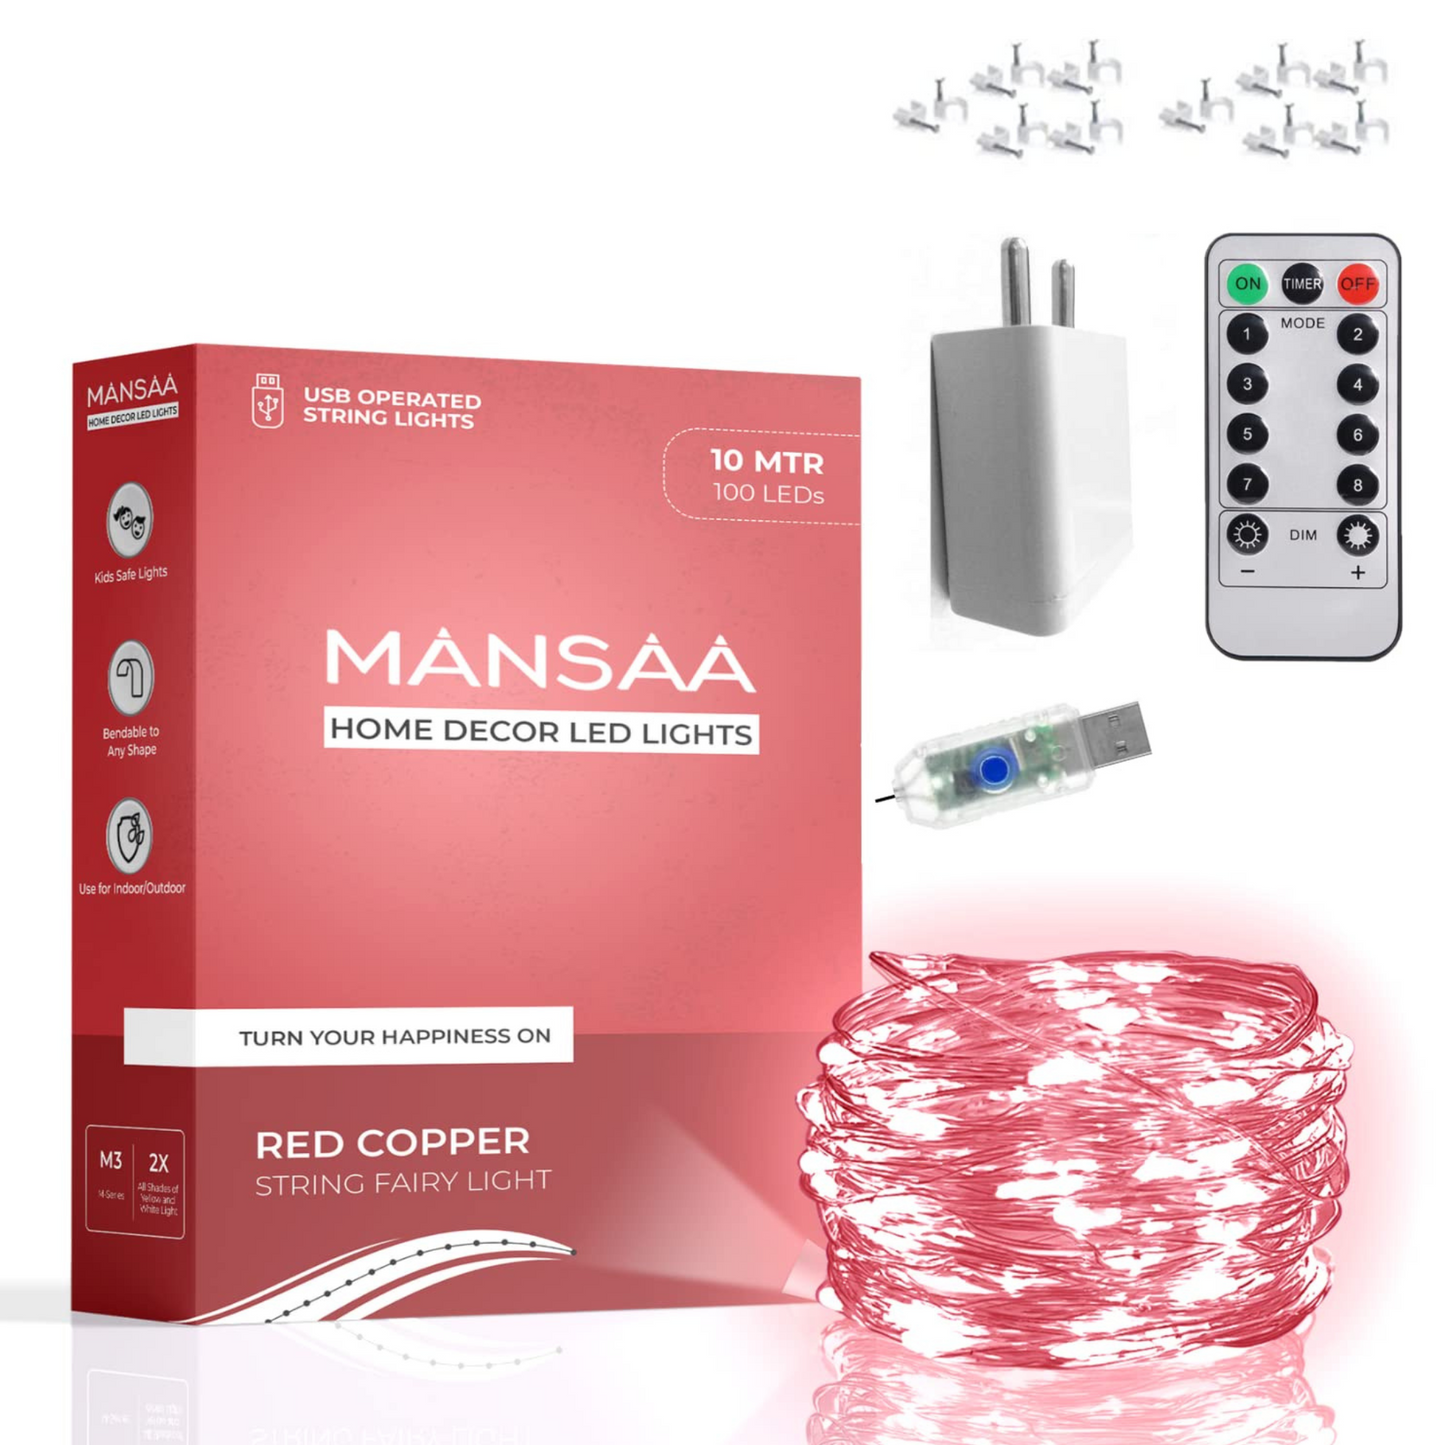 M7 USB LED Lights with Remote